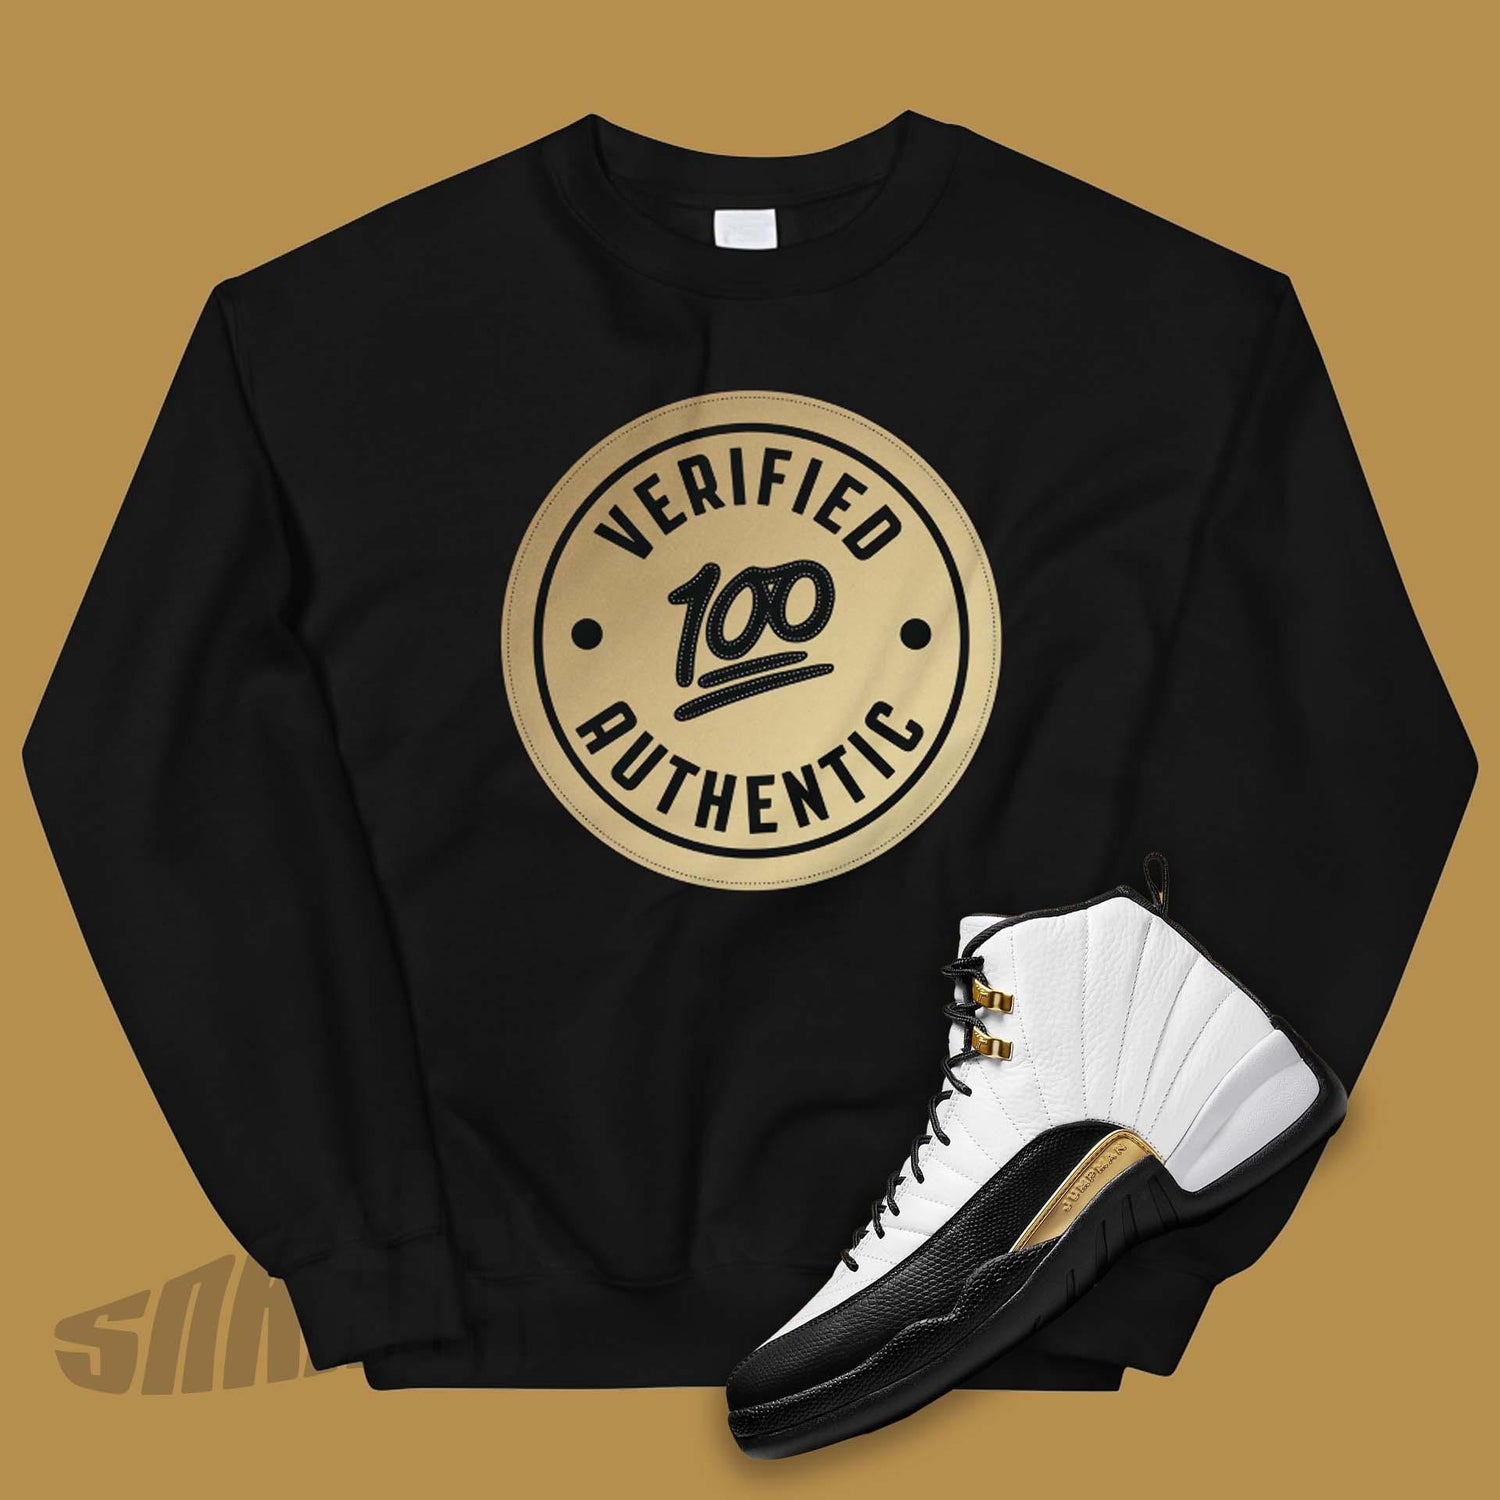 Verified Authentic In Gold on Black Sweatshirt match Air Jordan 12 Royalty Taxi